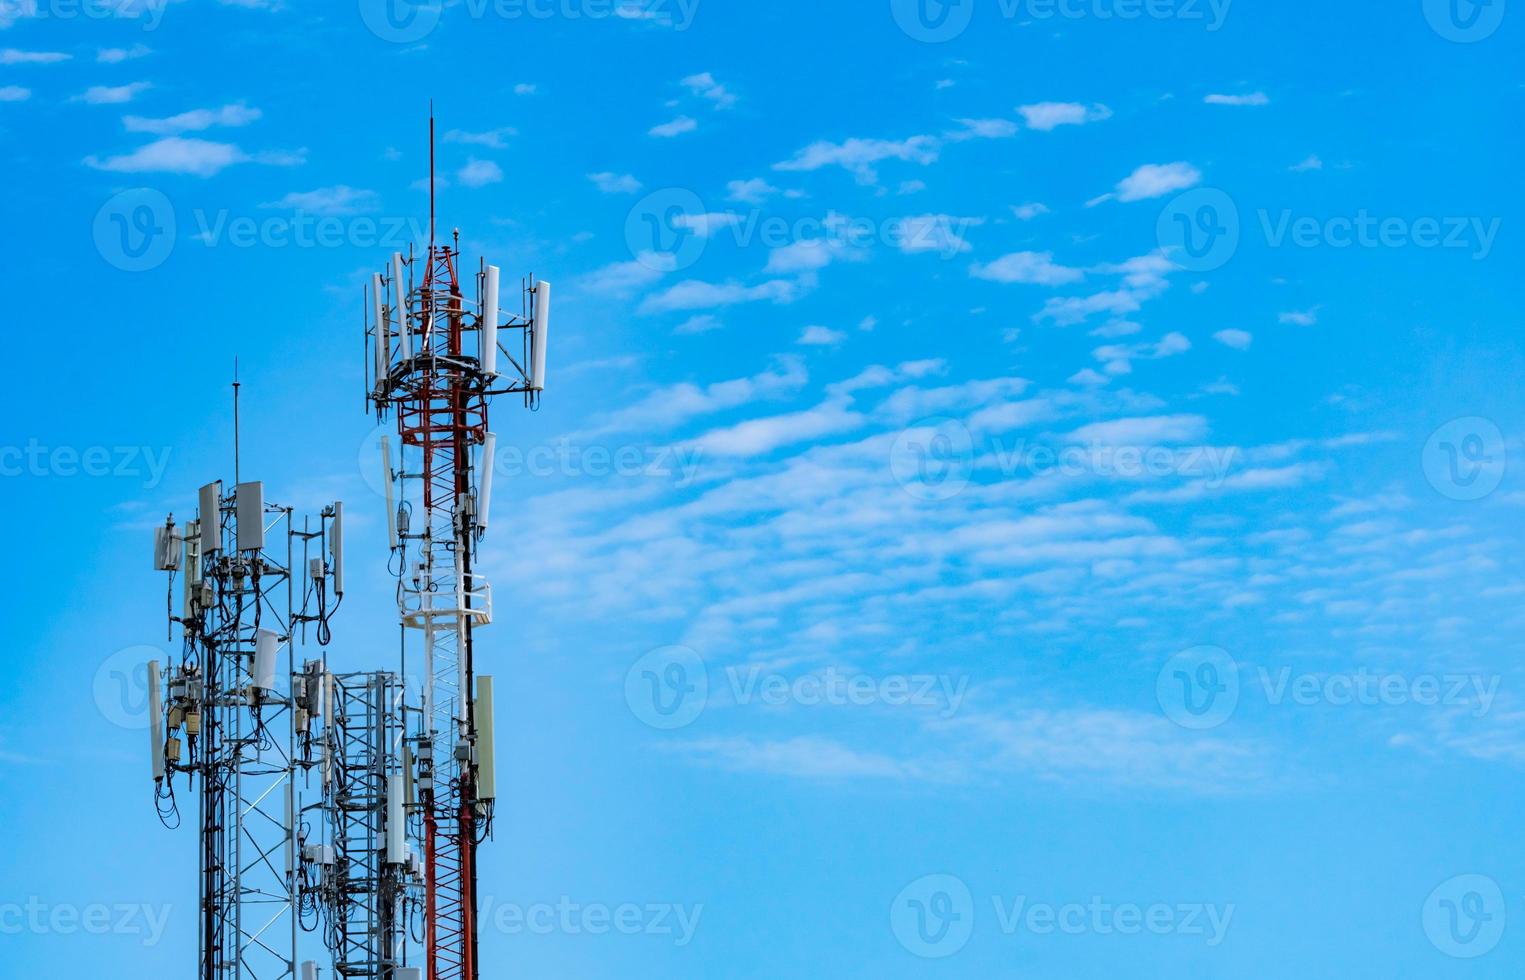 Telecommunication tower with blue sky and white clouds background. Antenna on blue sky. Radio and satellite pole. Communication technology. Telecommunication industry. Mobile or telecom 4g network. photo